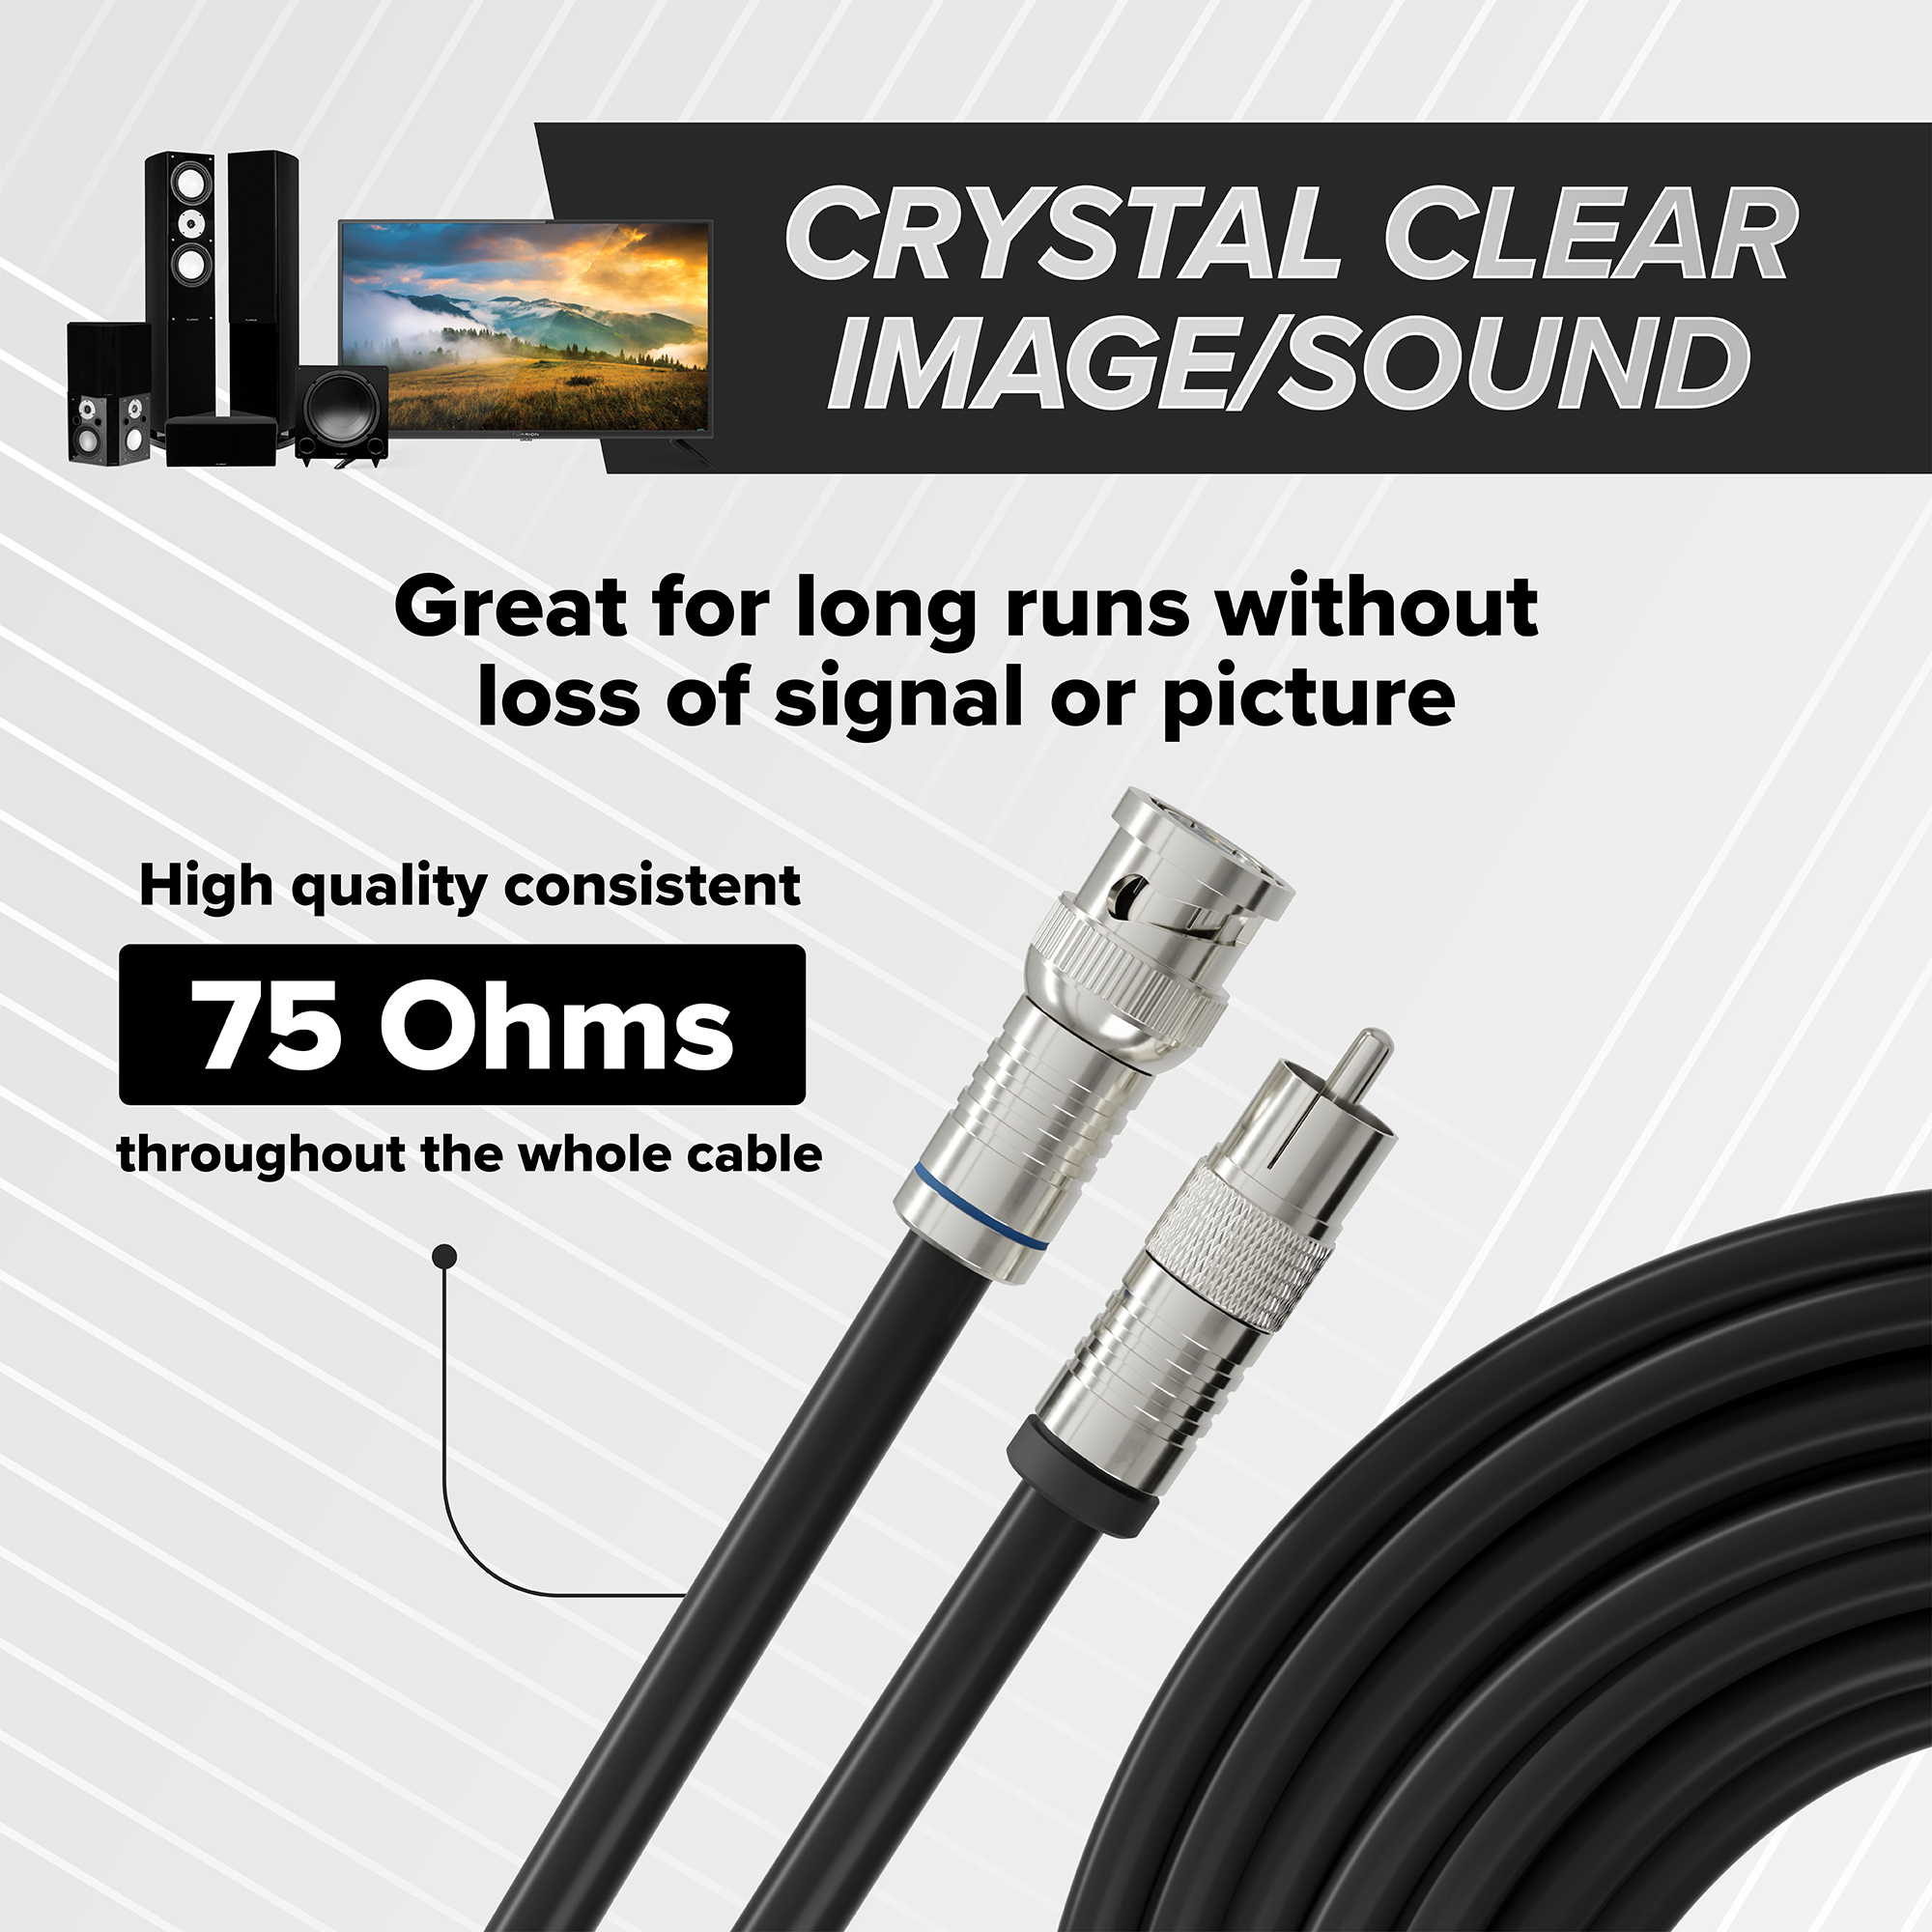 Black, 6 ft BNC to RCA RG6 Cable - Professional Grade - Male BNC to Male RCA Cable  - BNC Cable - 75 Ohm Coaxial, 50/75 Ohm Connectors, SDI, HD-SDI, CCTV, Camera, and More - 6 Feet Long, in Black - image 5 of 10